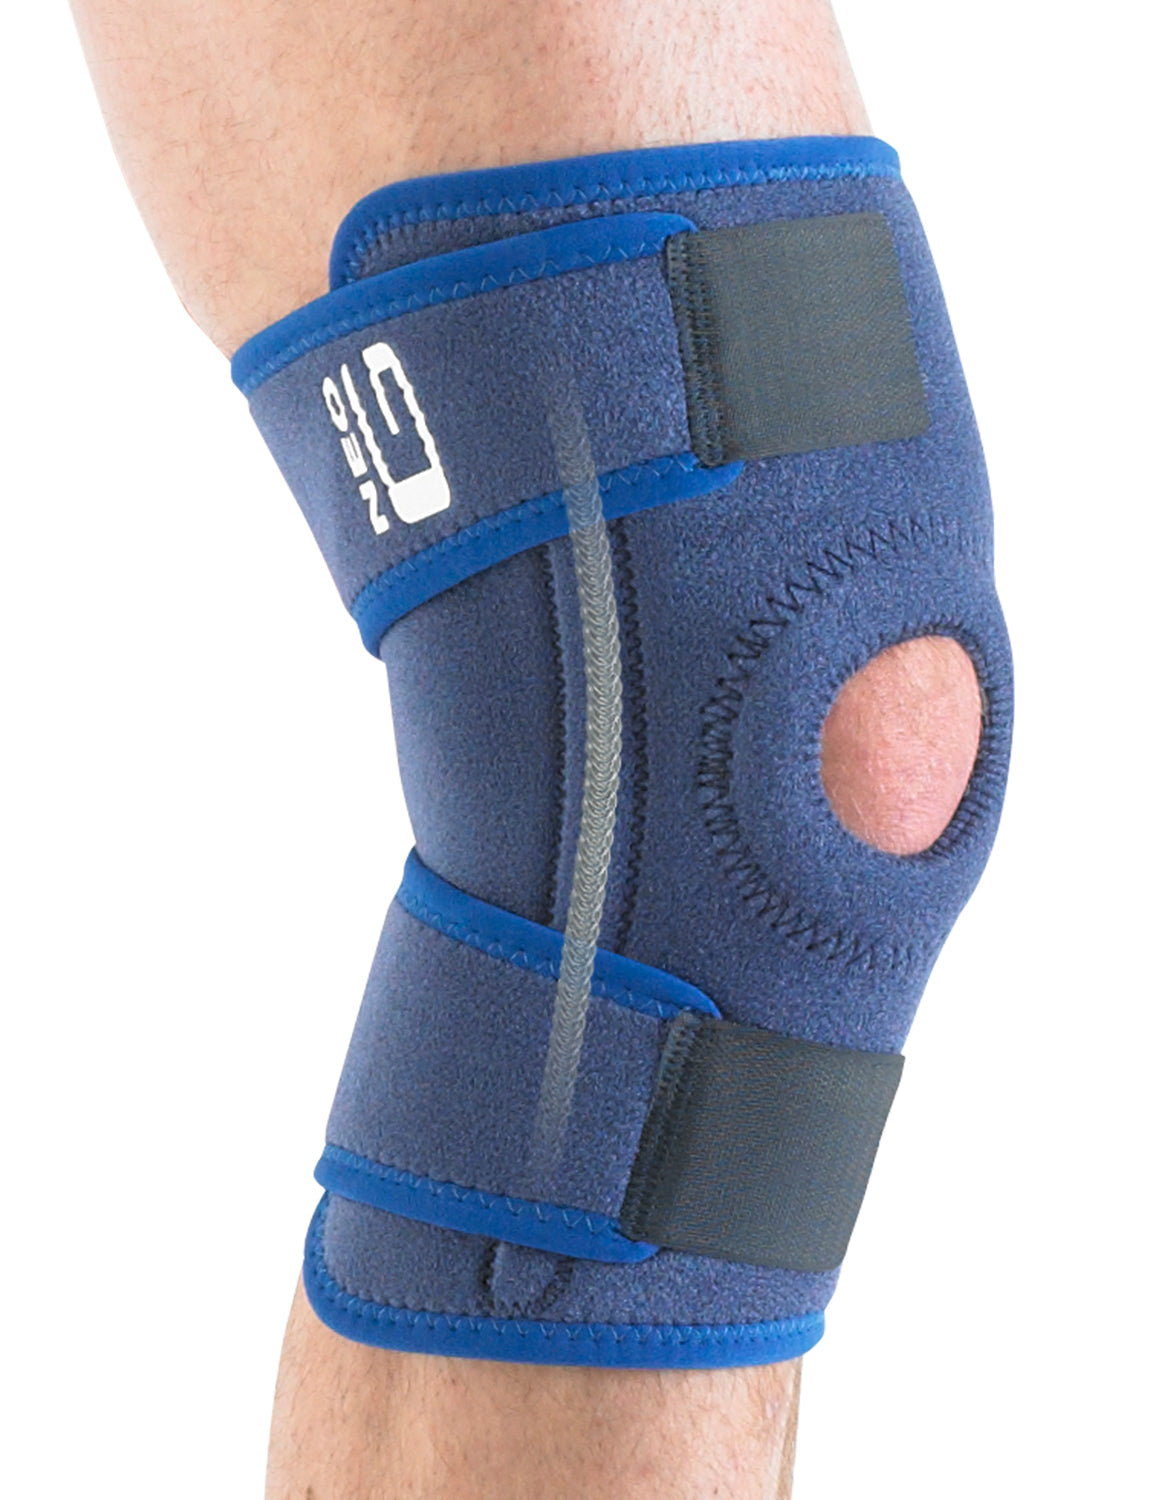 Knee Brace by ComfyMed Premium Adjustable Compression Support Sleeve  CM-KB19 for Sport or Pain Relief